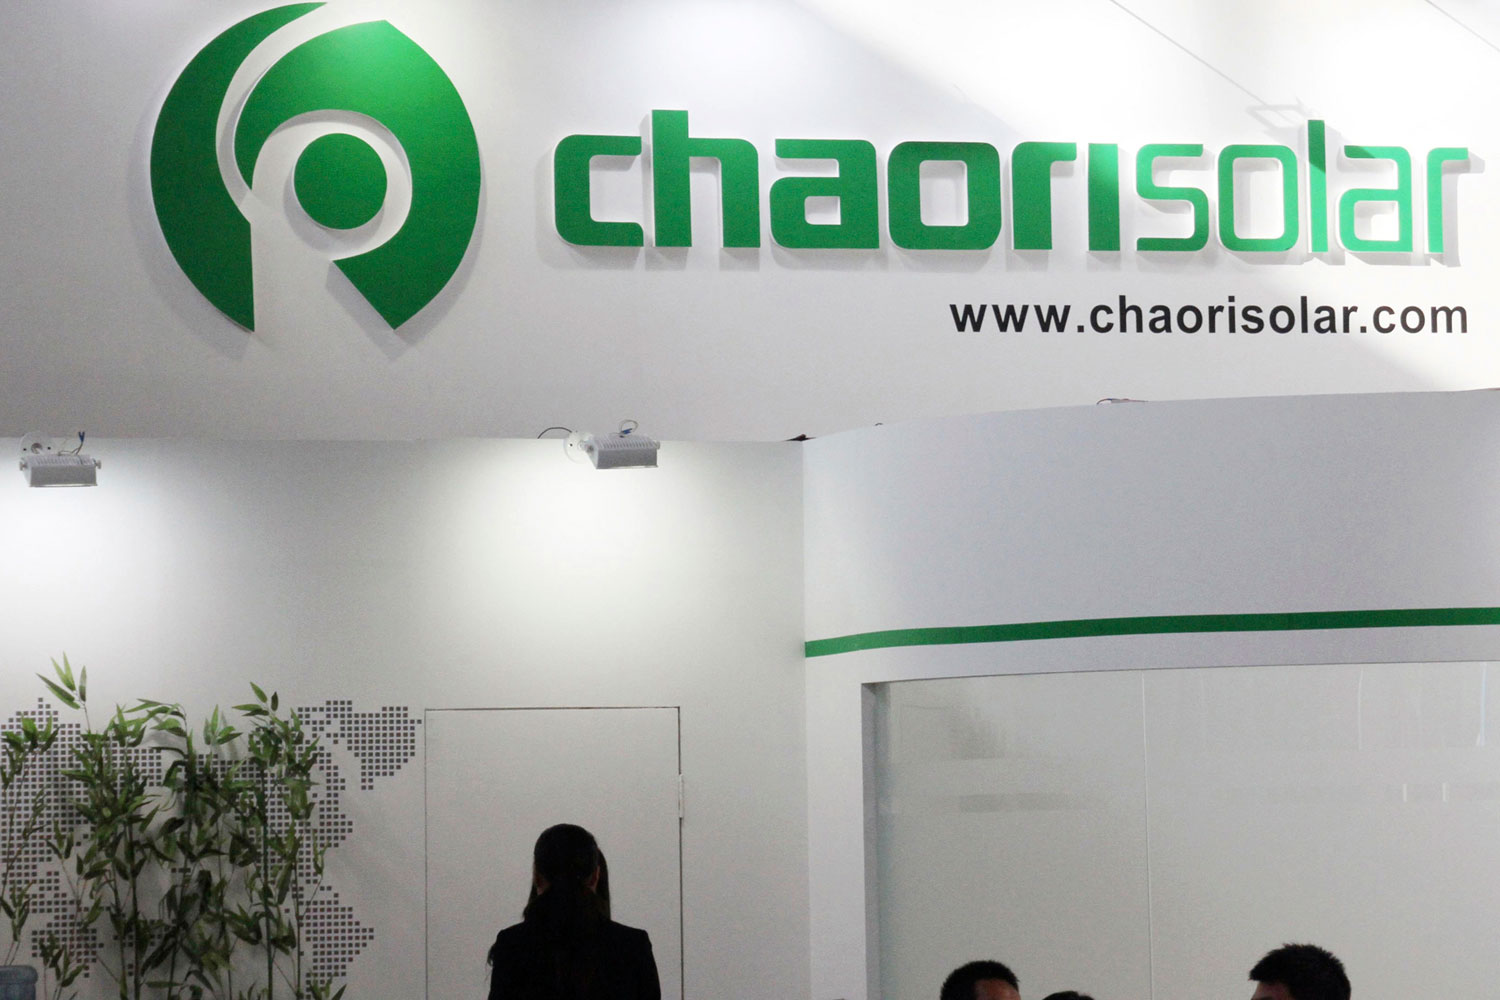 A company logo of Chaori Solar is seen at the 12th China Photovoltaic Conference and International Photovoltaic Exhibition in Beijing on Sept. 5, 2012. (Reuters)